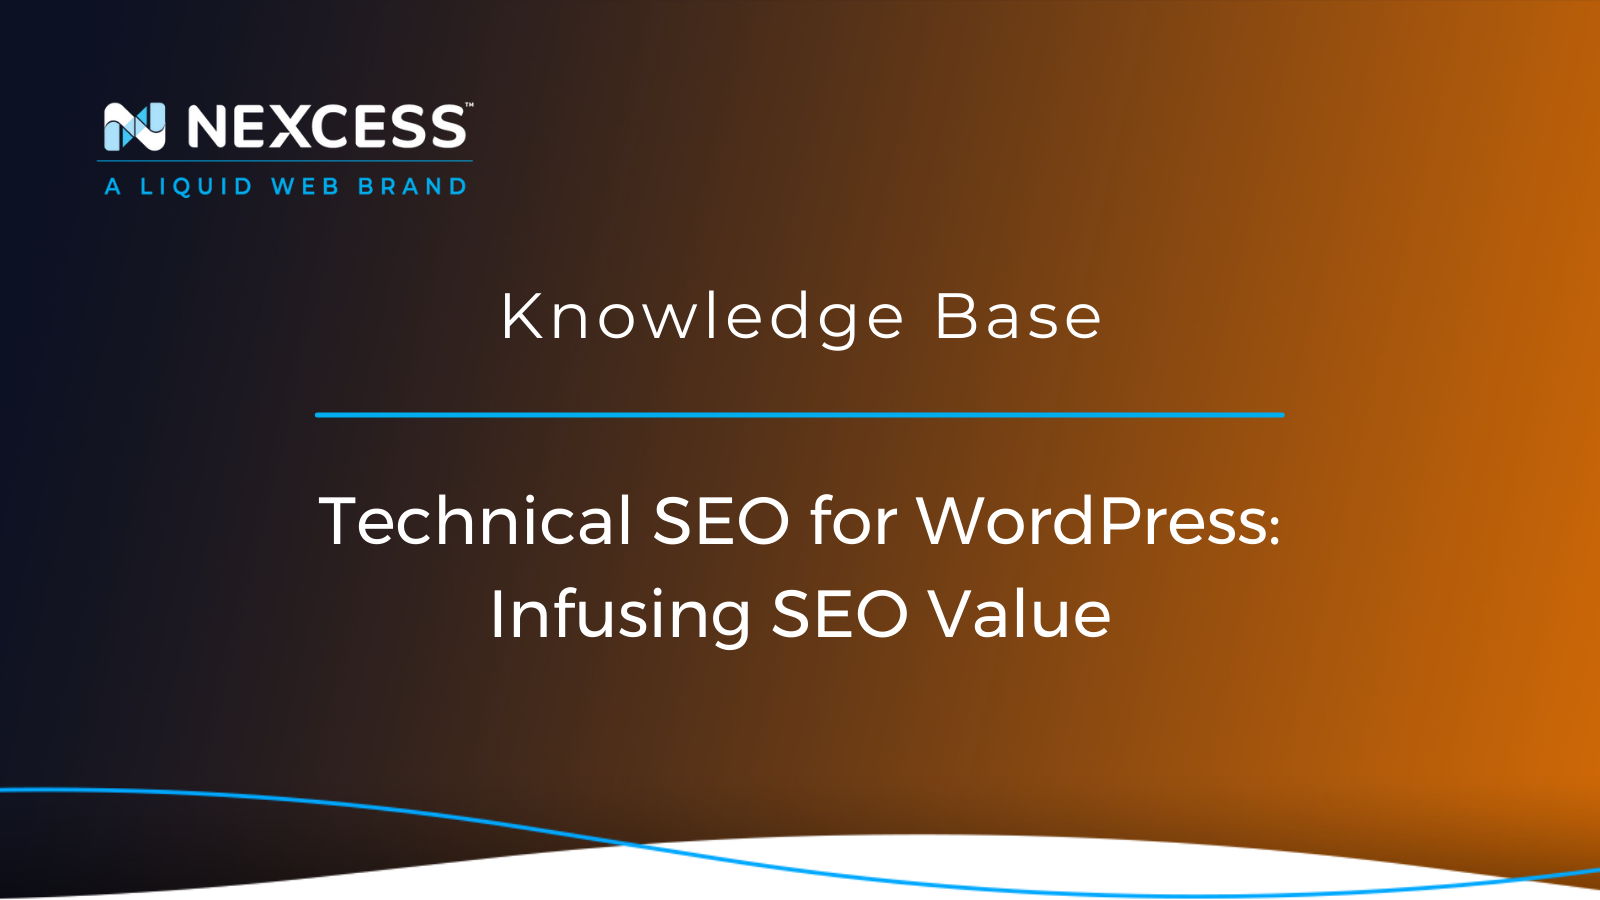 Technical SEO for WordPress: Infusing SEO Value